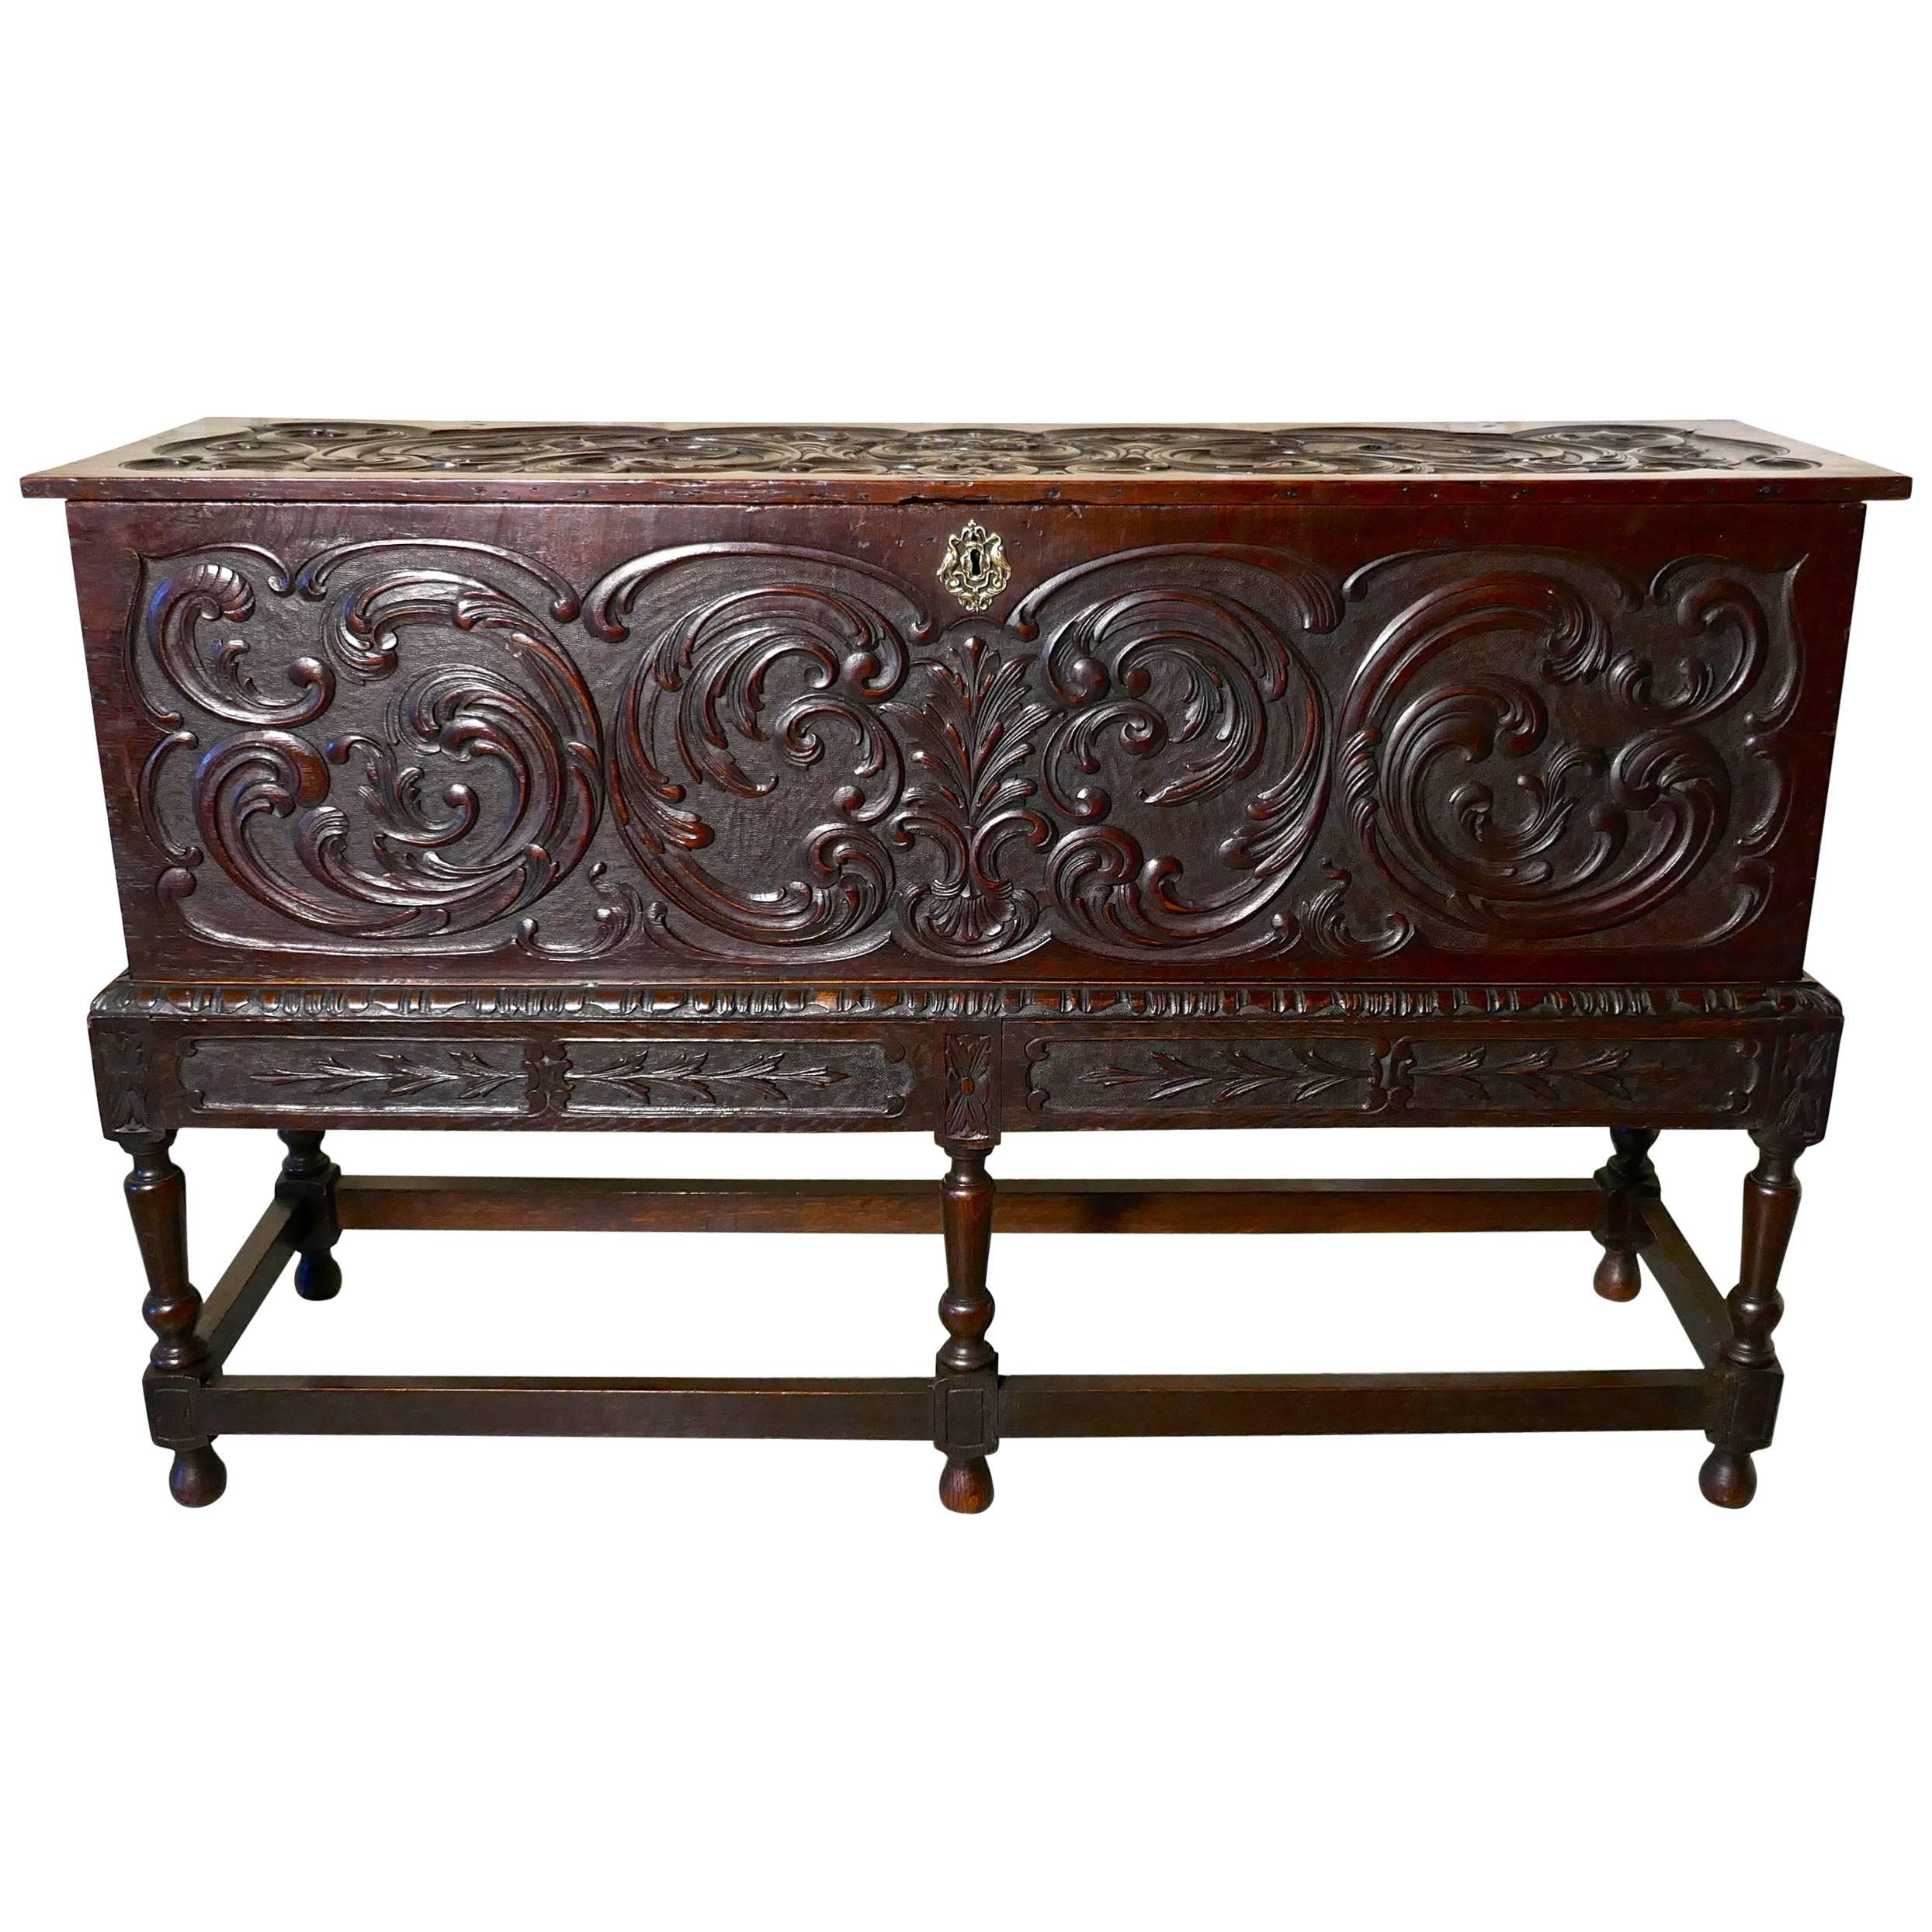 17th century carved oak sword chest on stand.

This is a rare and wonderful old piece, the chest is carved on the top sides and front
The quality of the carving is very fine, it is deep and crisp and in very good condition, the turned leg stand